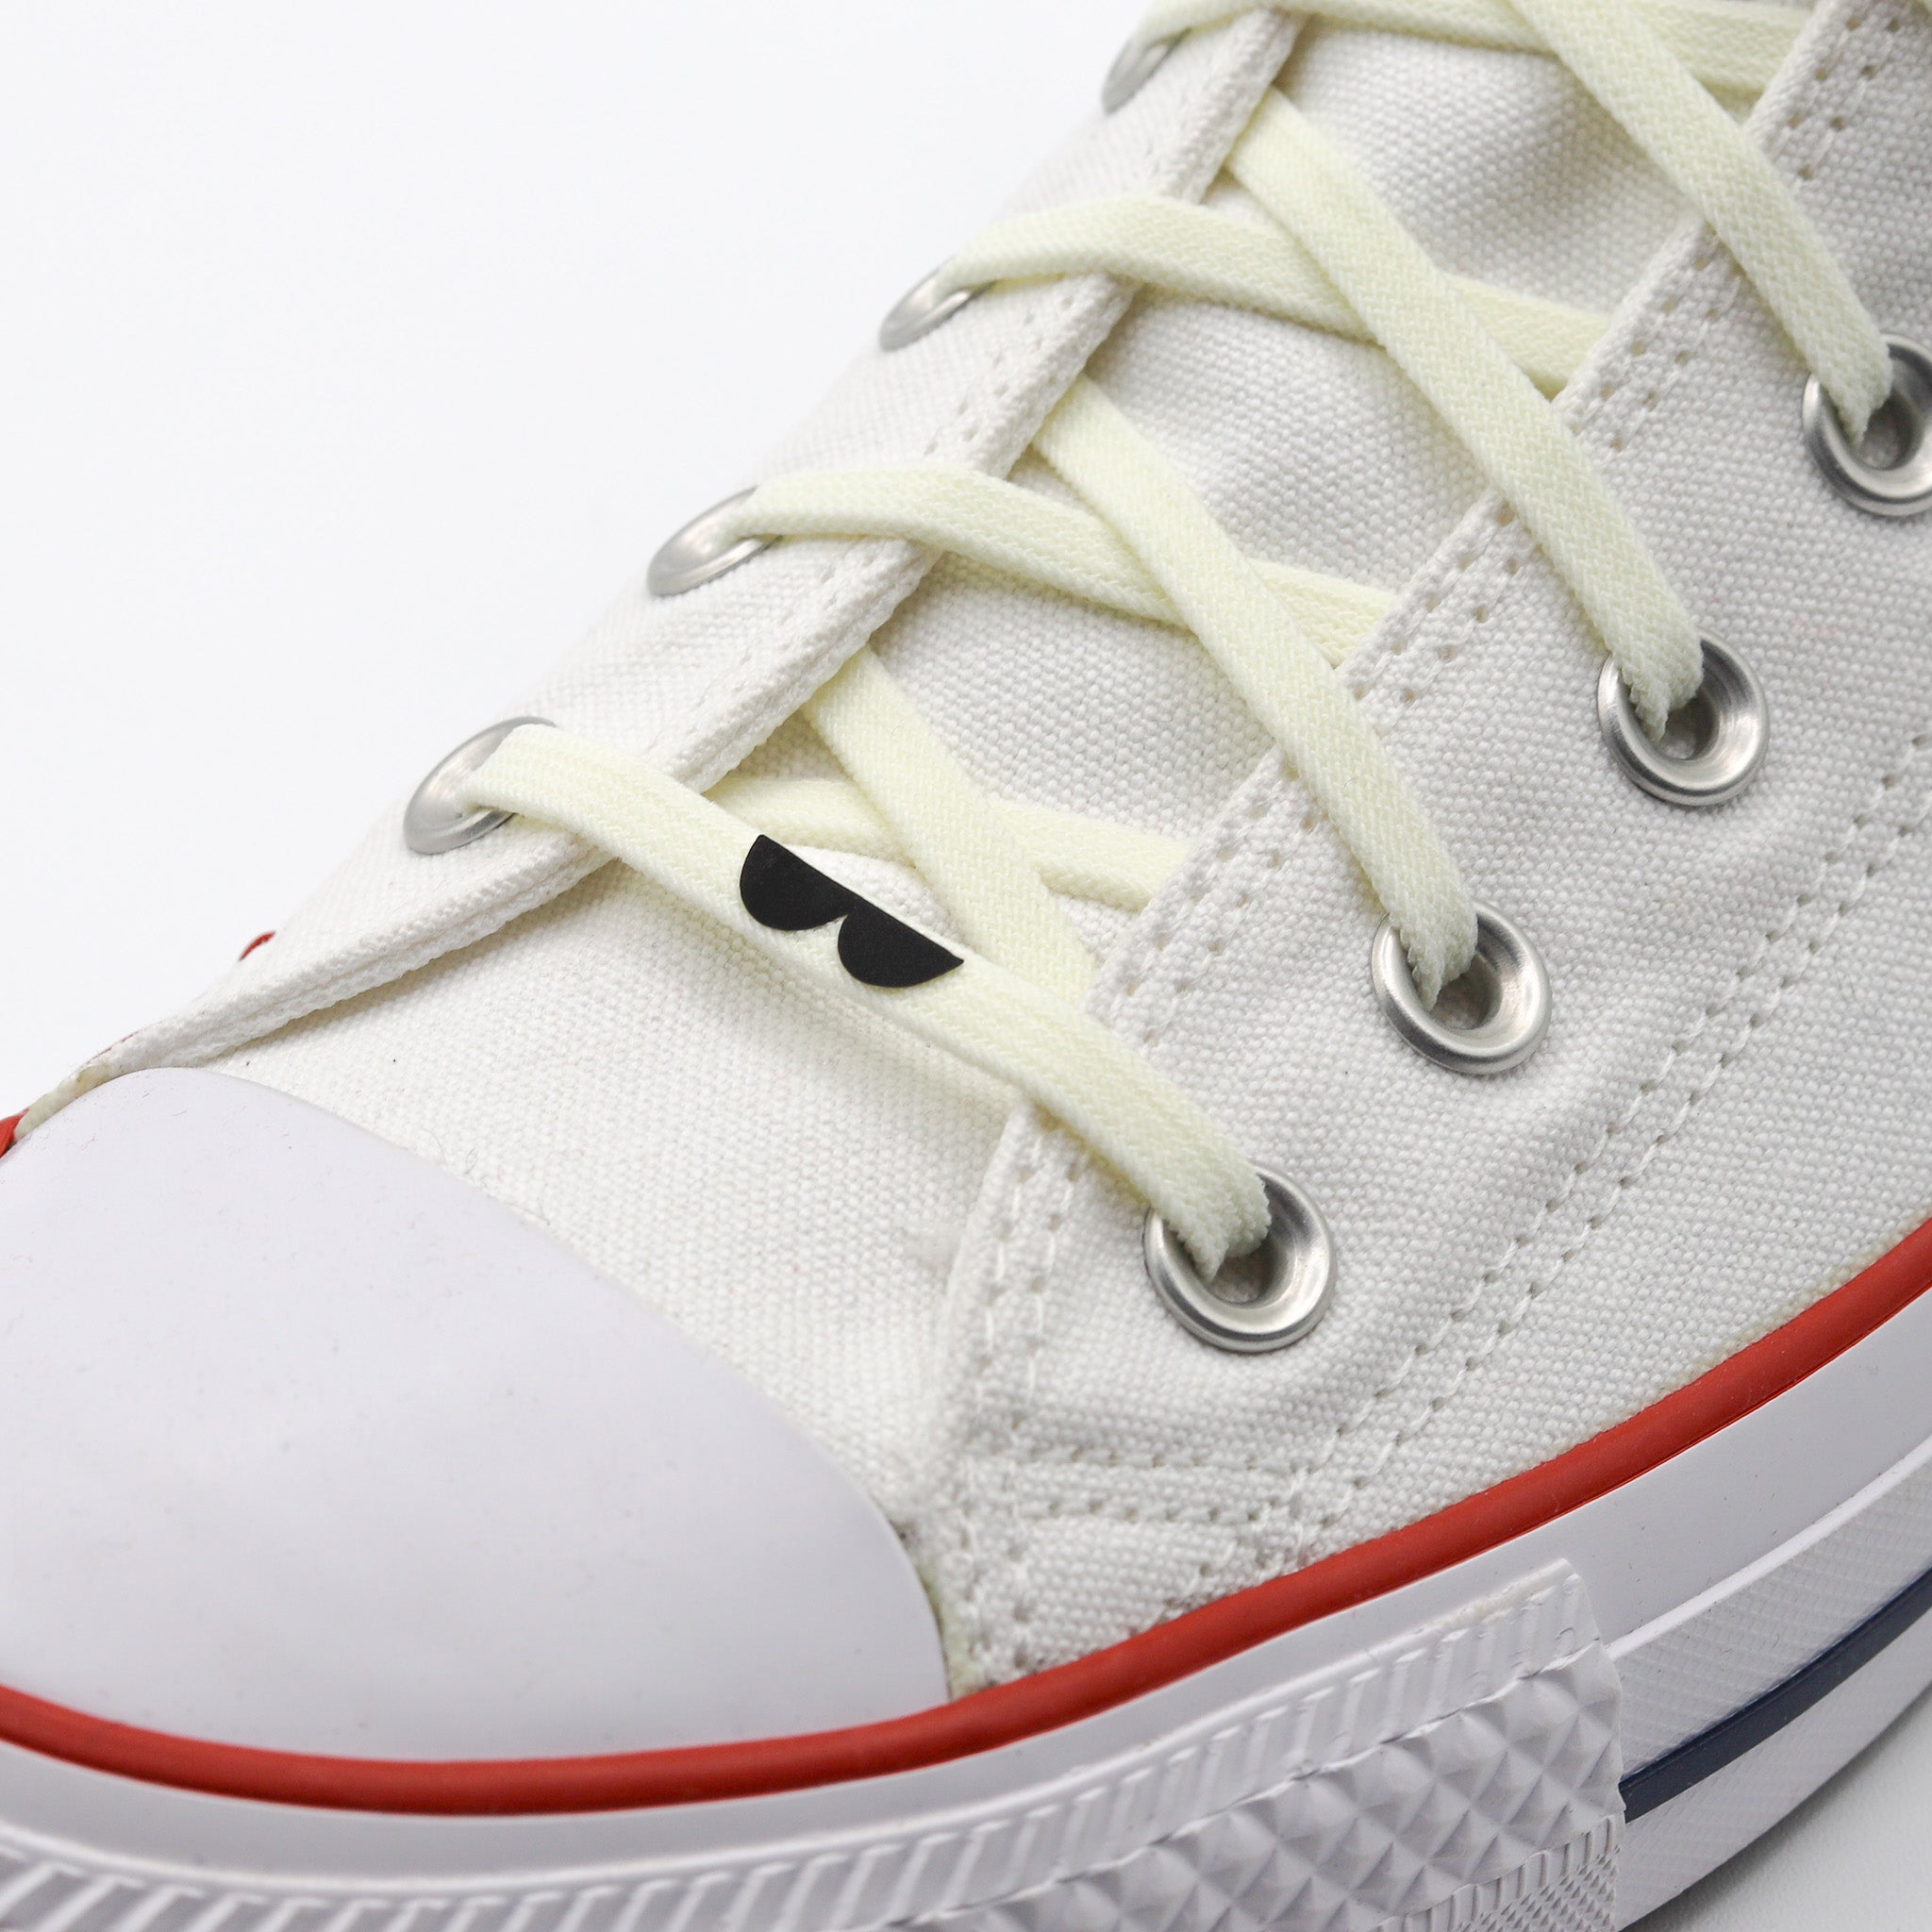 Breadlace Official Site | Bread Elastic Shoelaces - Free Shipping